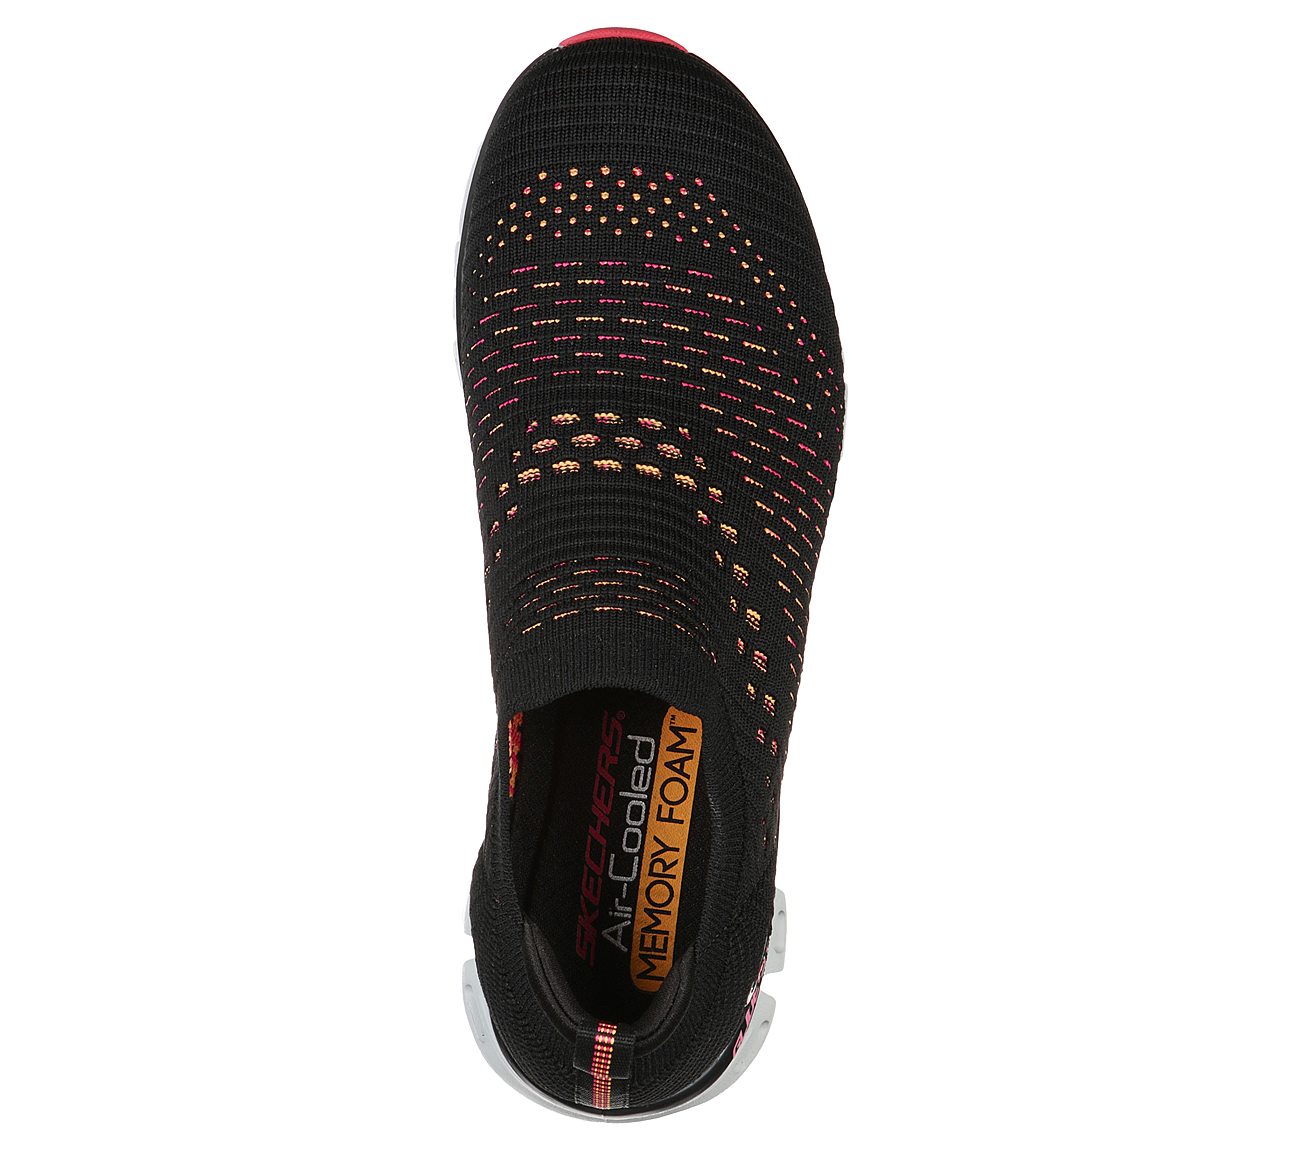 GLIDE-STEP - OH SO SOFT, BLACK/HOT PINK Footwear Top View